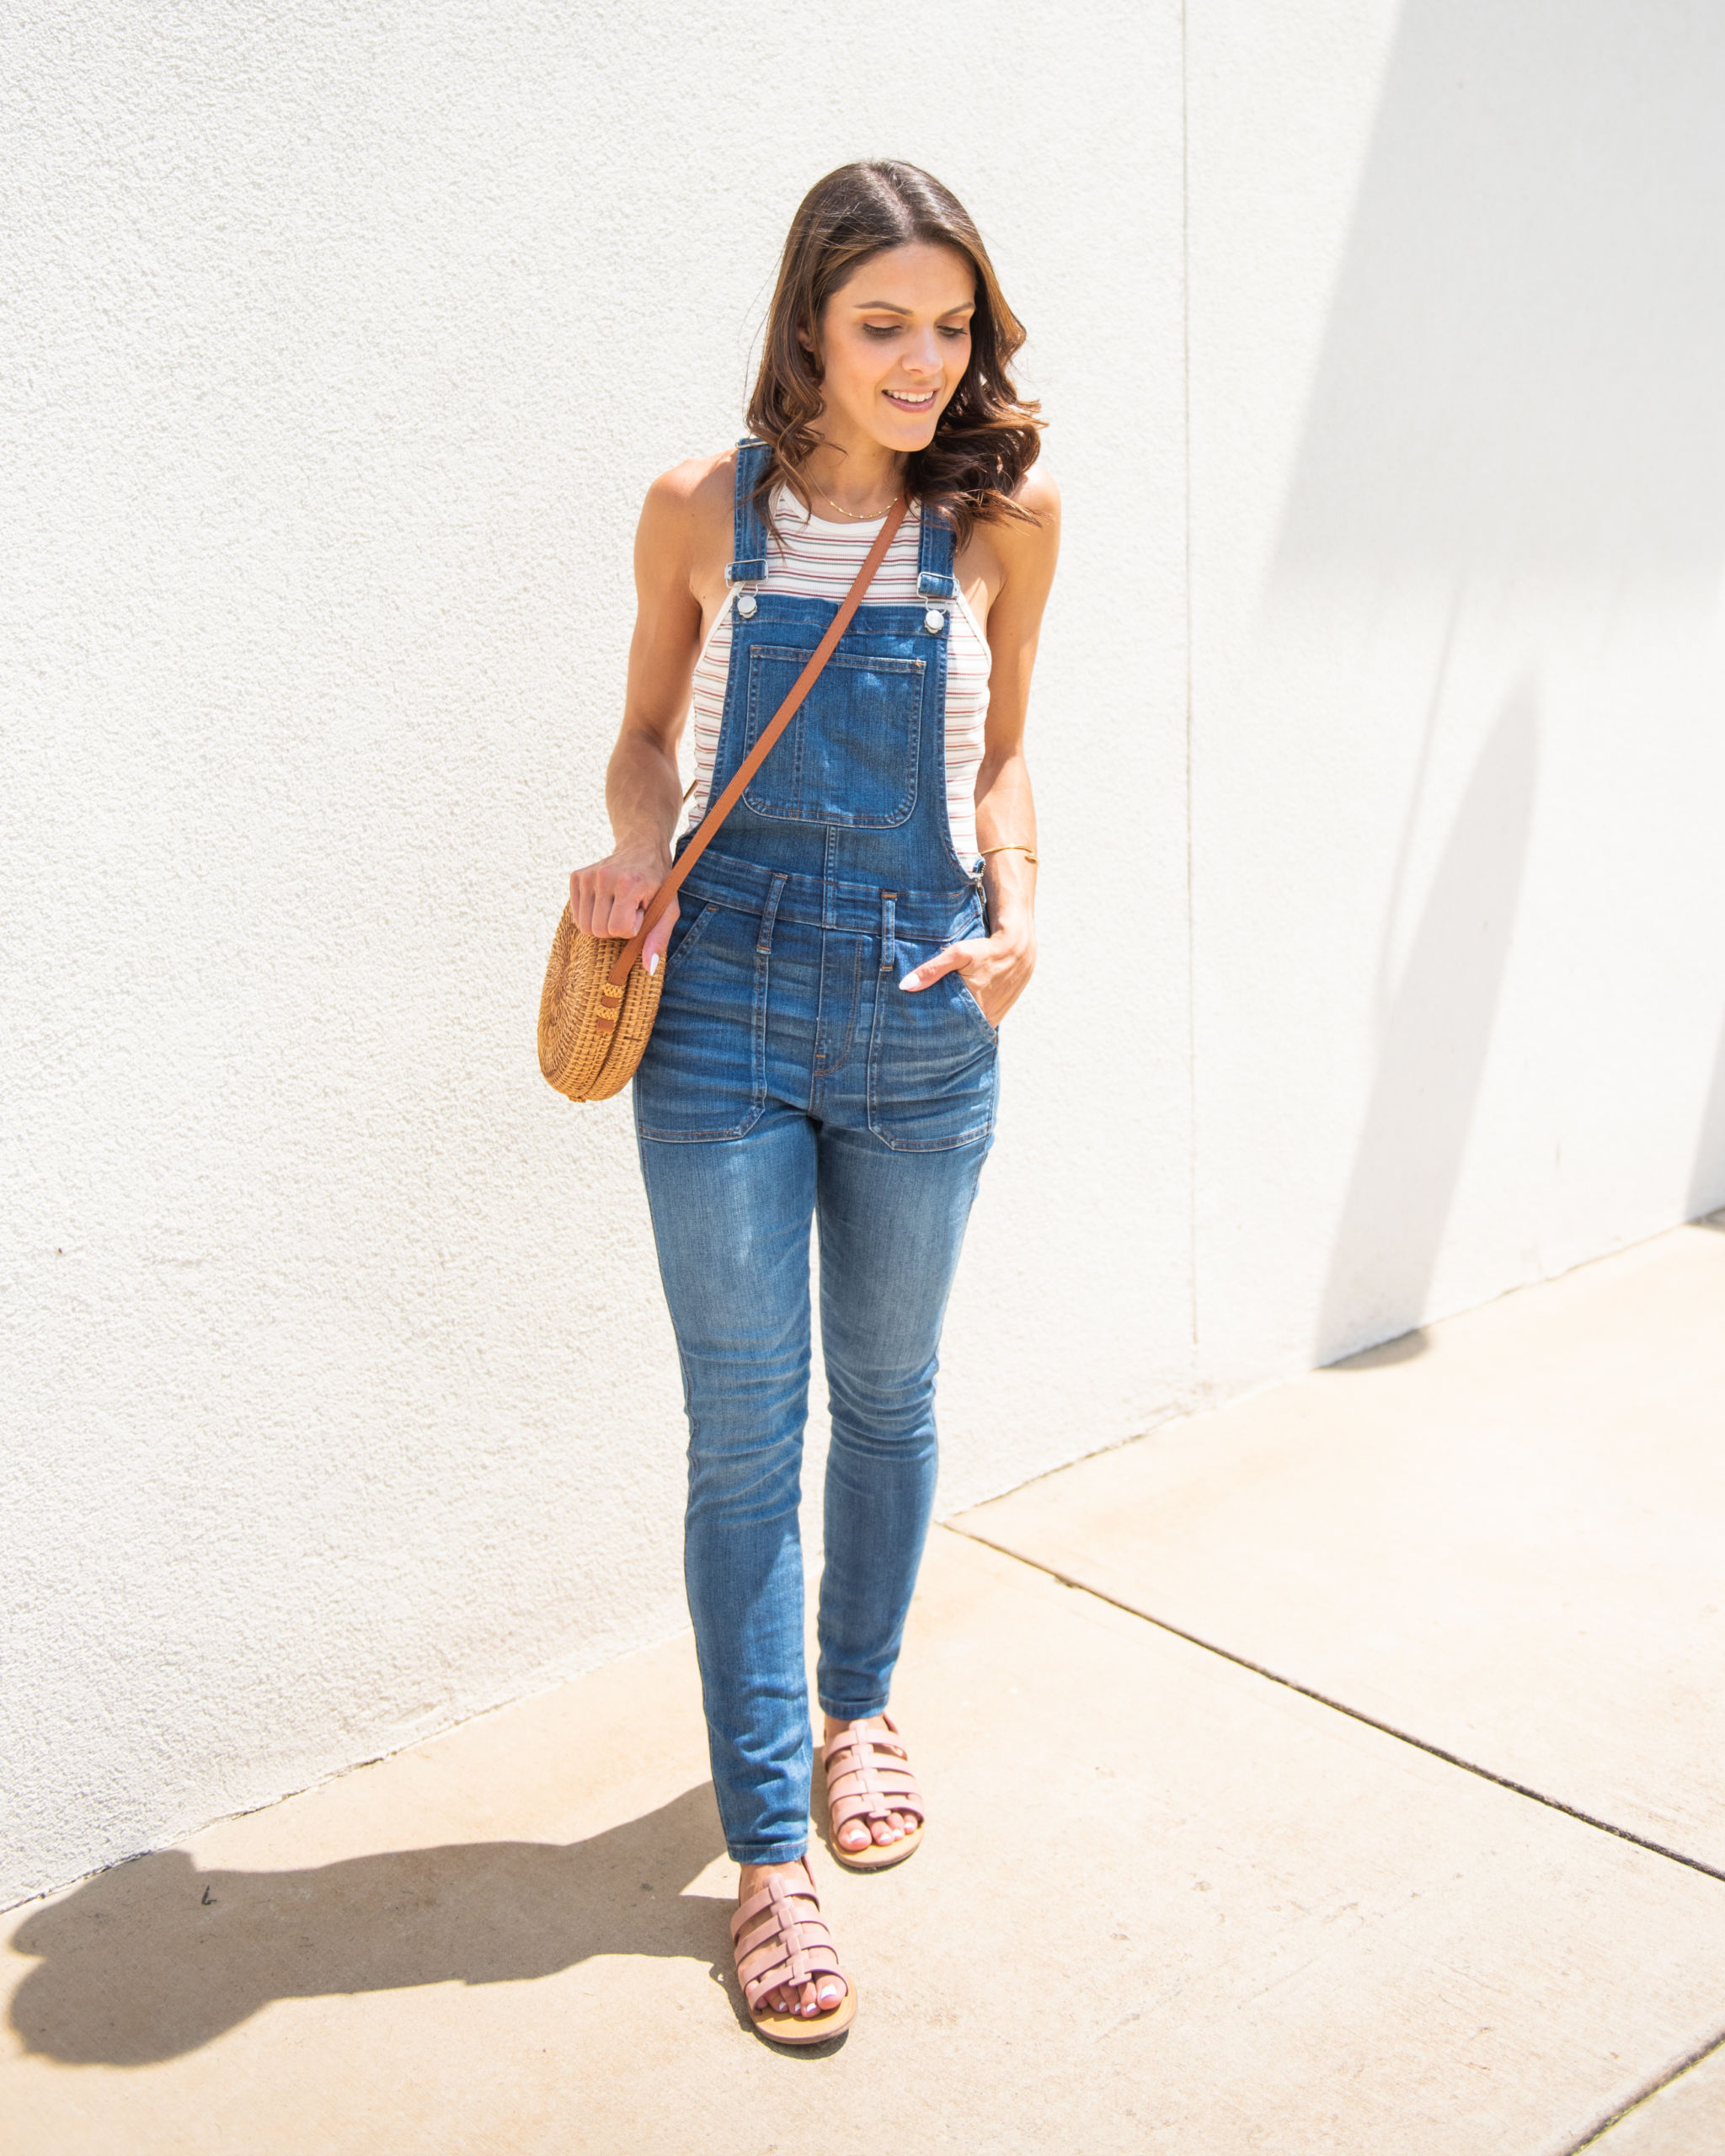 4 ways to transition skinny overalls to Fall